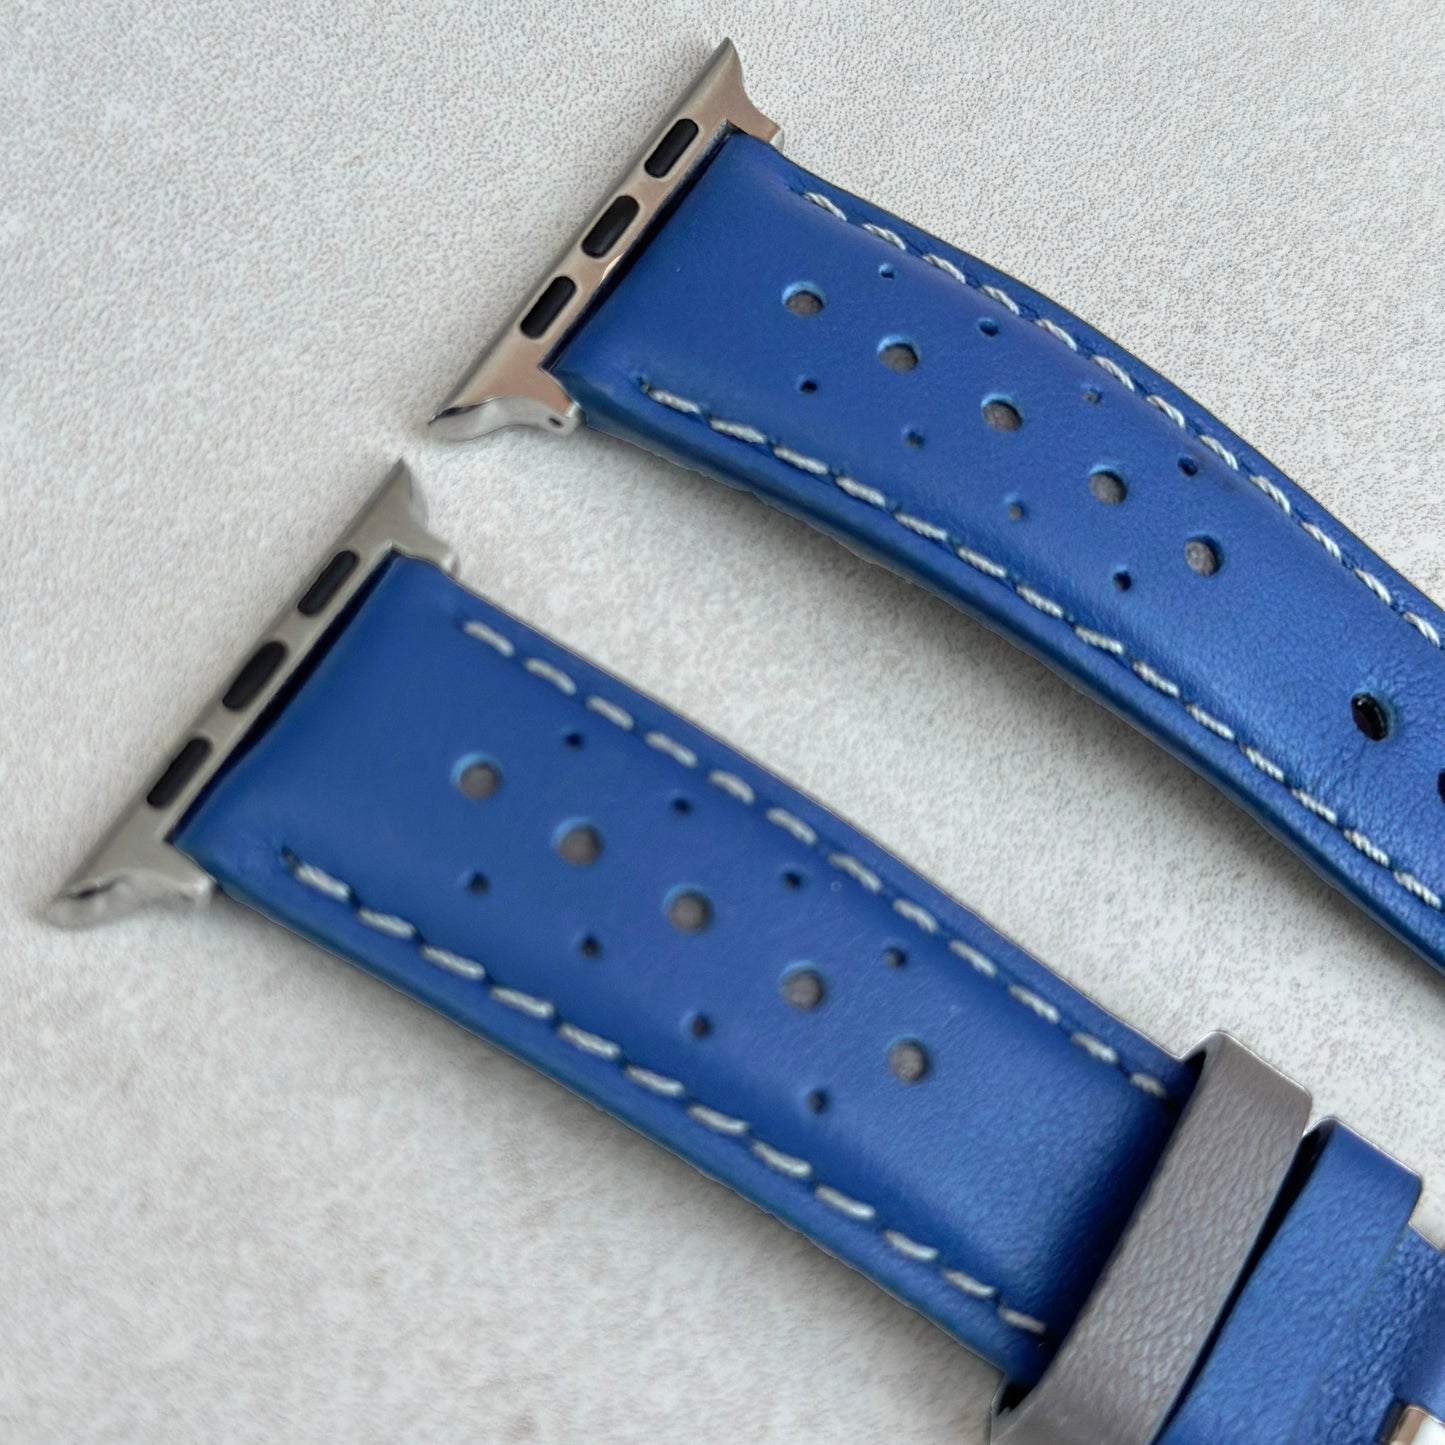 Top of the Le Mans Blue and grey apple watch strap. Padded apple watch strap, 316L stainless steel hardware.